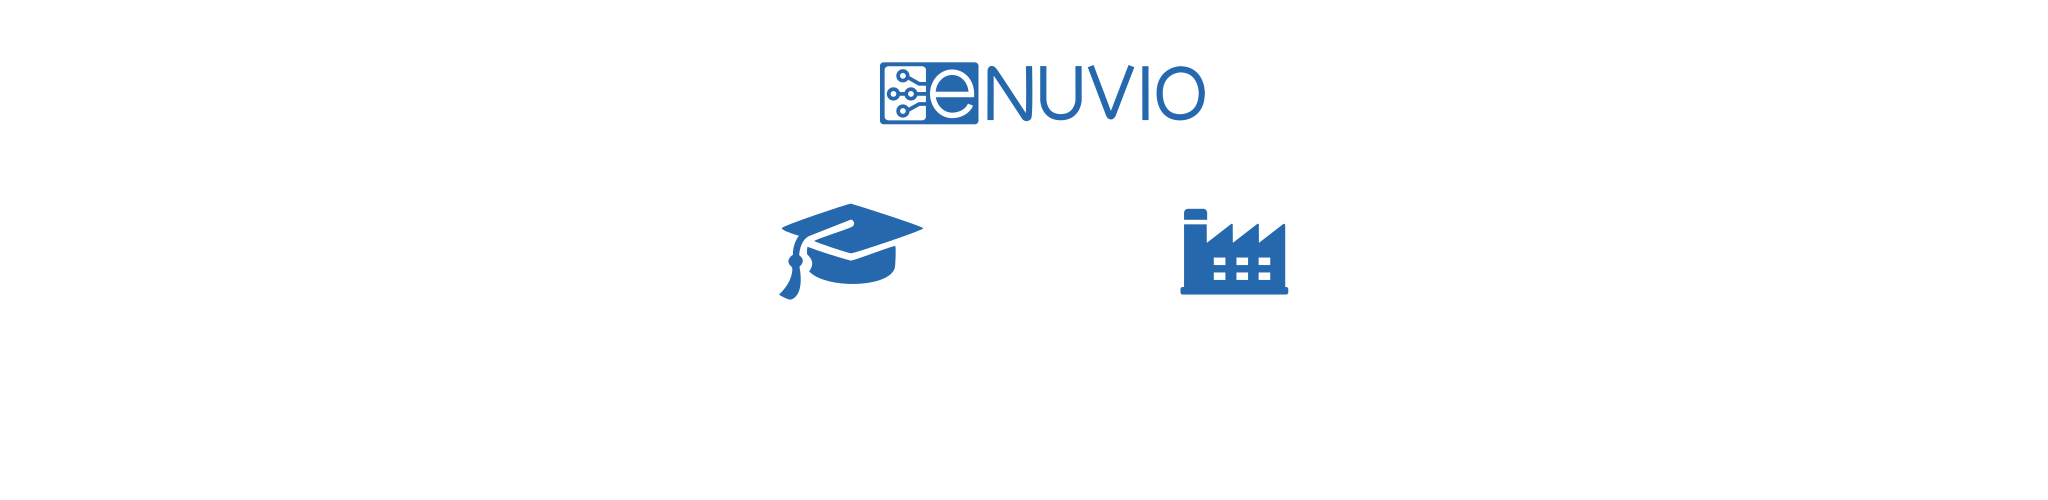 Blue illustration, top eNUVIO logo, white lines connecting the logo to a graduation cap and fabrication building. Text under graduation cap: "Academia" and "Research labs", Text under fabrication building: "CROs", "Pharma" and "Biotech"